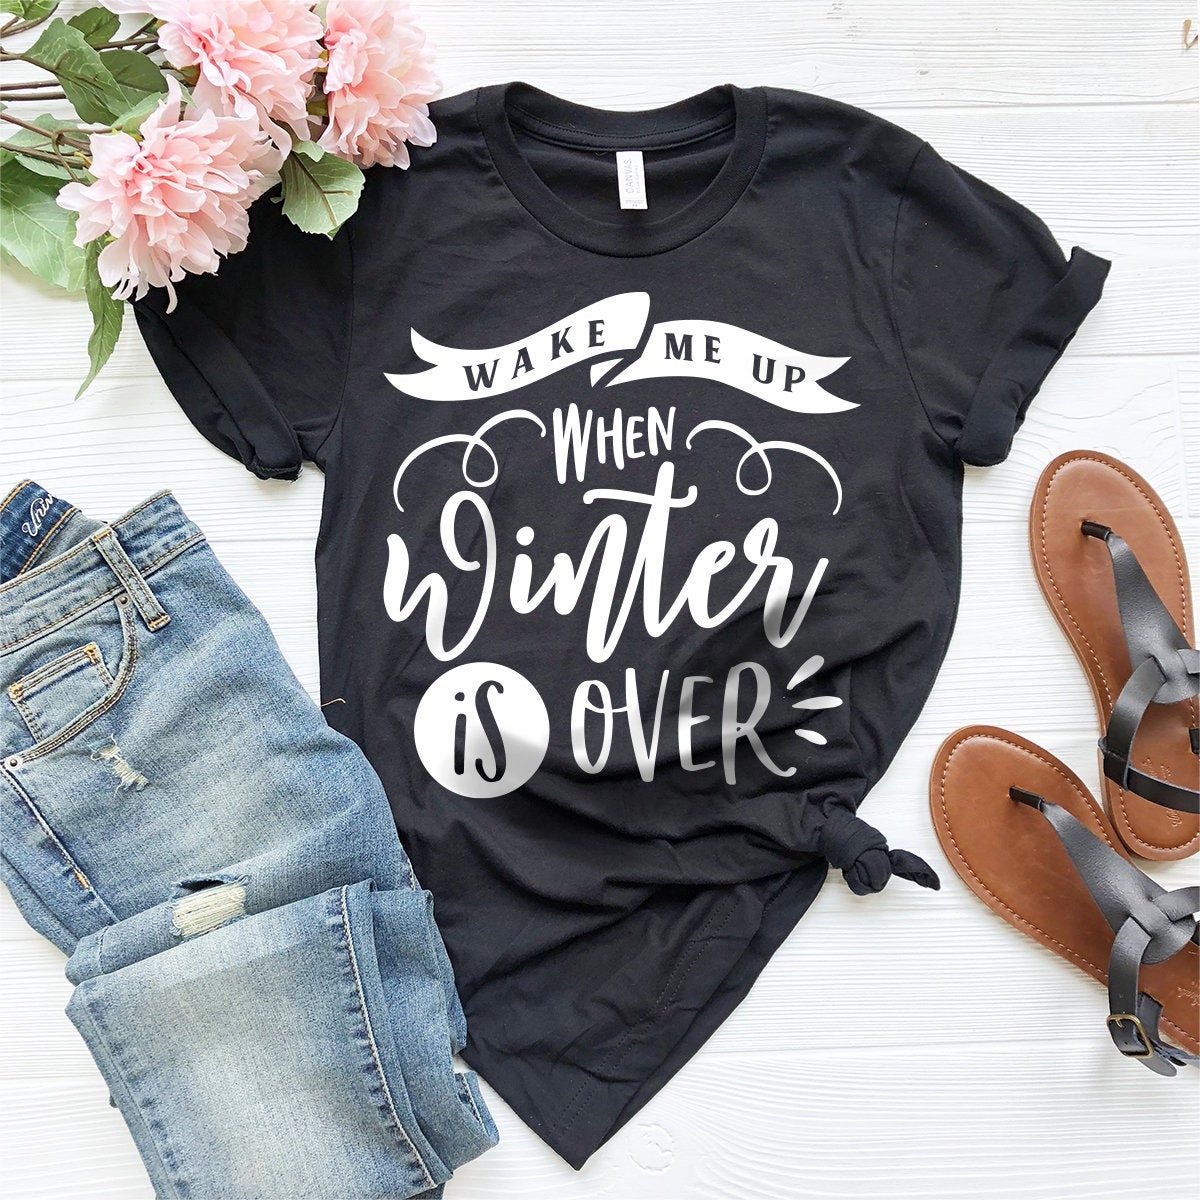 Wake Me Up When Winter Is Over T-Shirt, Winter Hater Tshirt, Funny Christmas Tee, Funny Winter Shirt, Sarcastic Christmas Gift Shirt - Fastdeliverytees.com